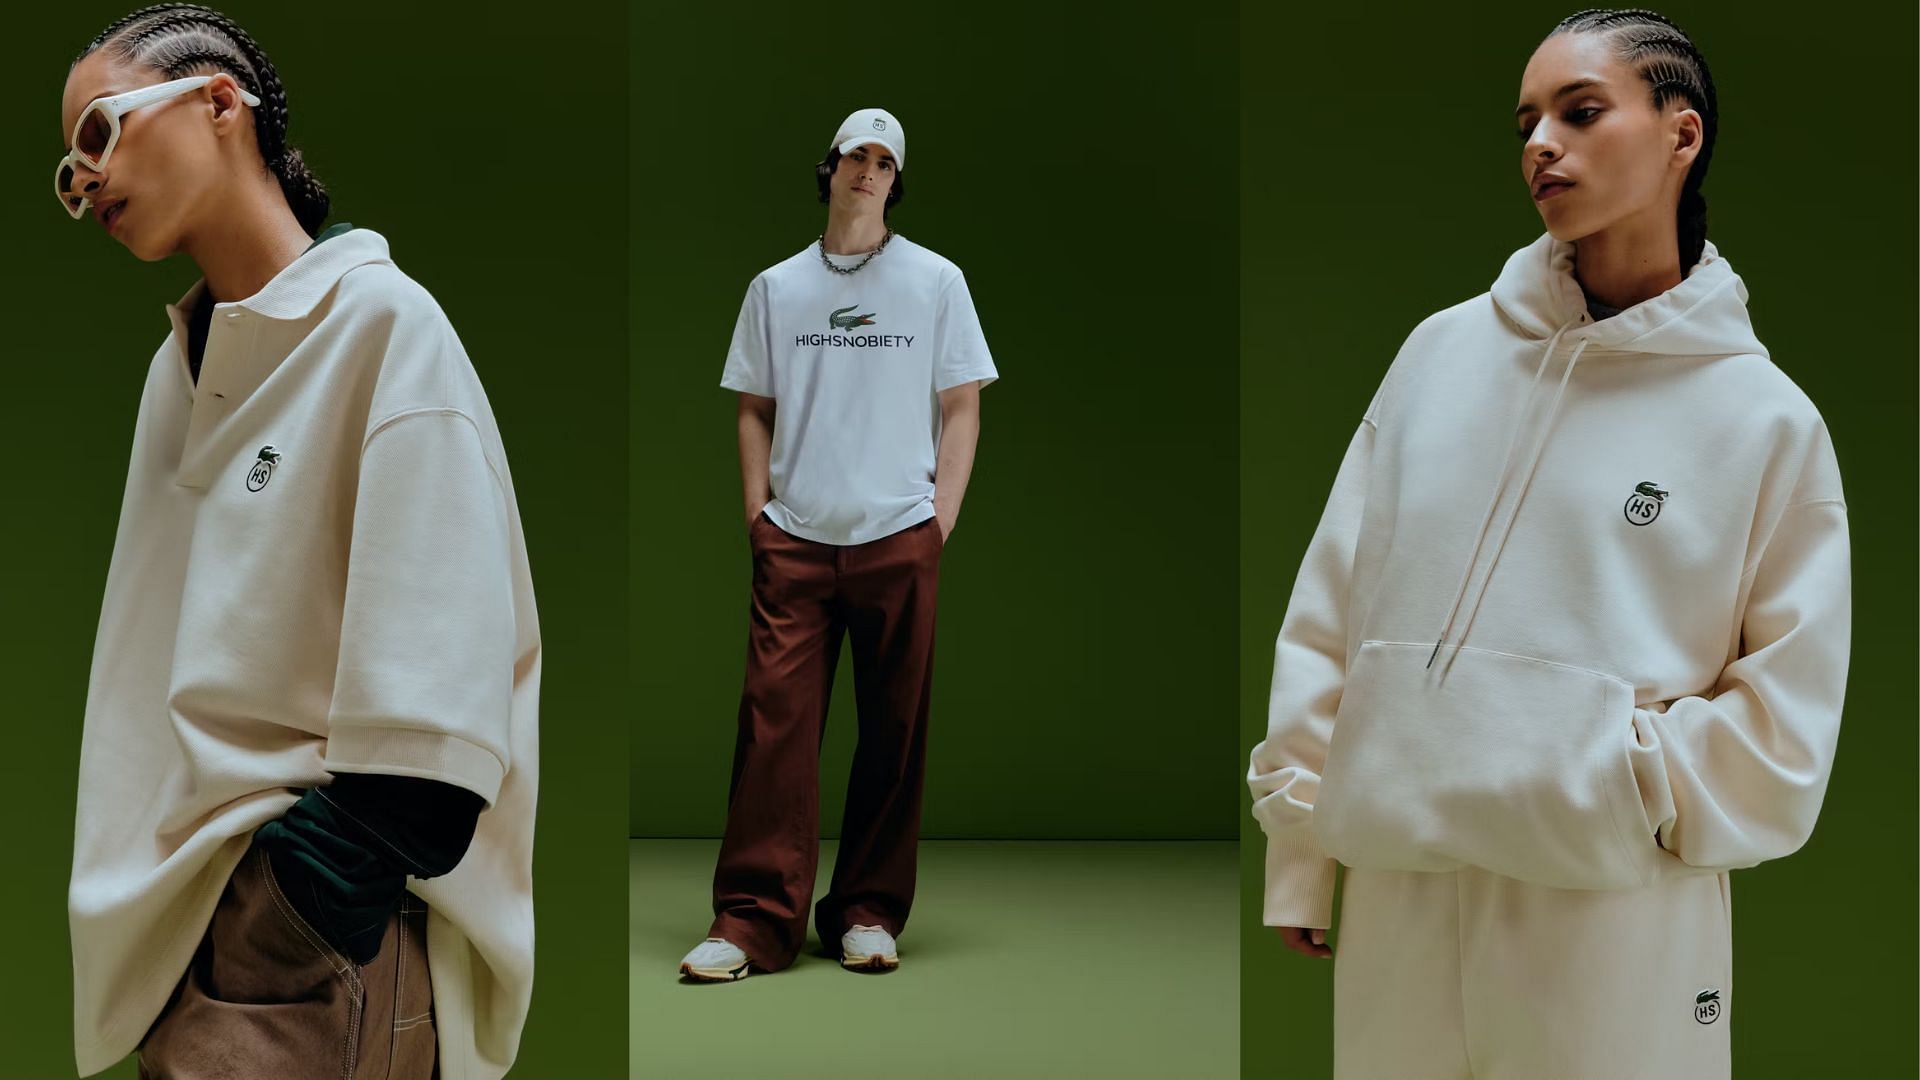 Lacoste x Highsnobiety Tennis-inspired collection